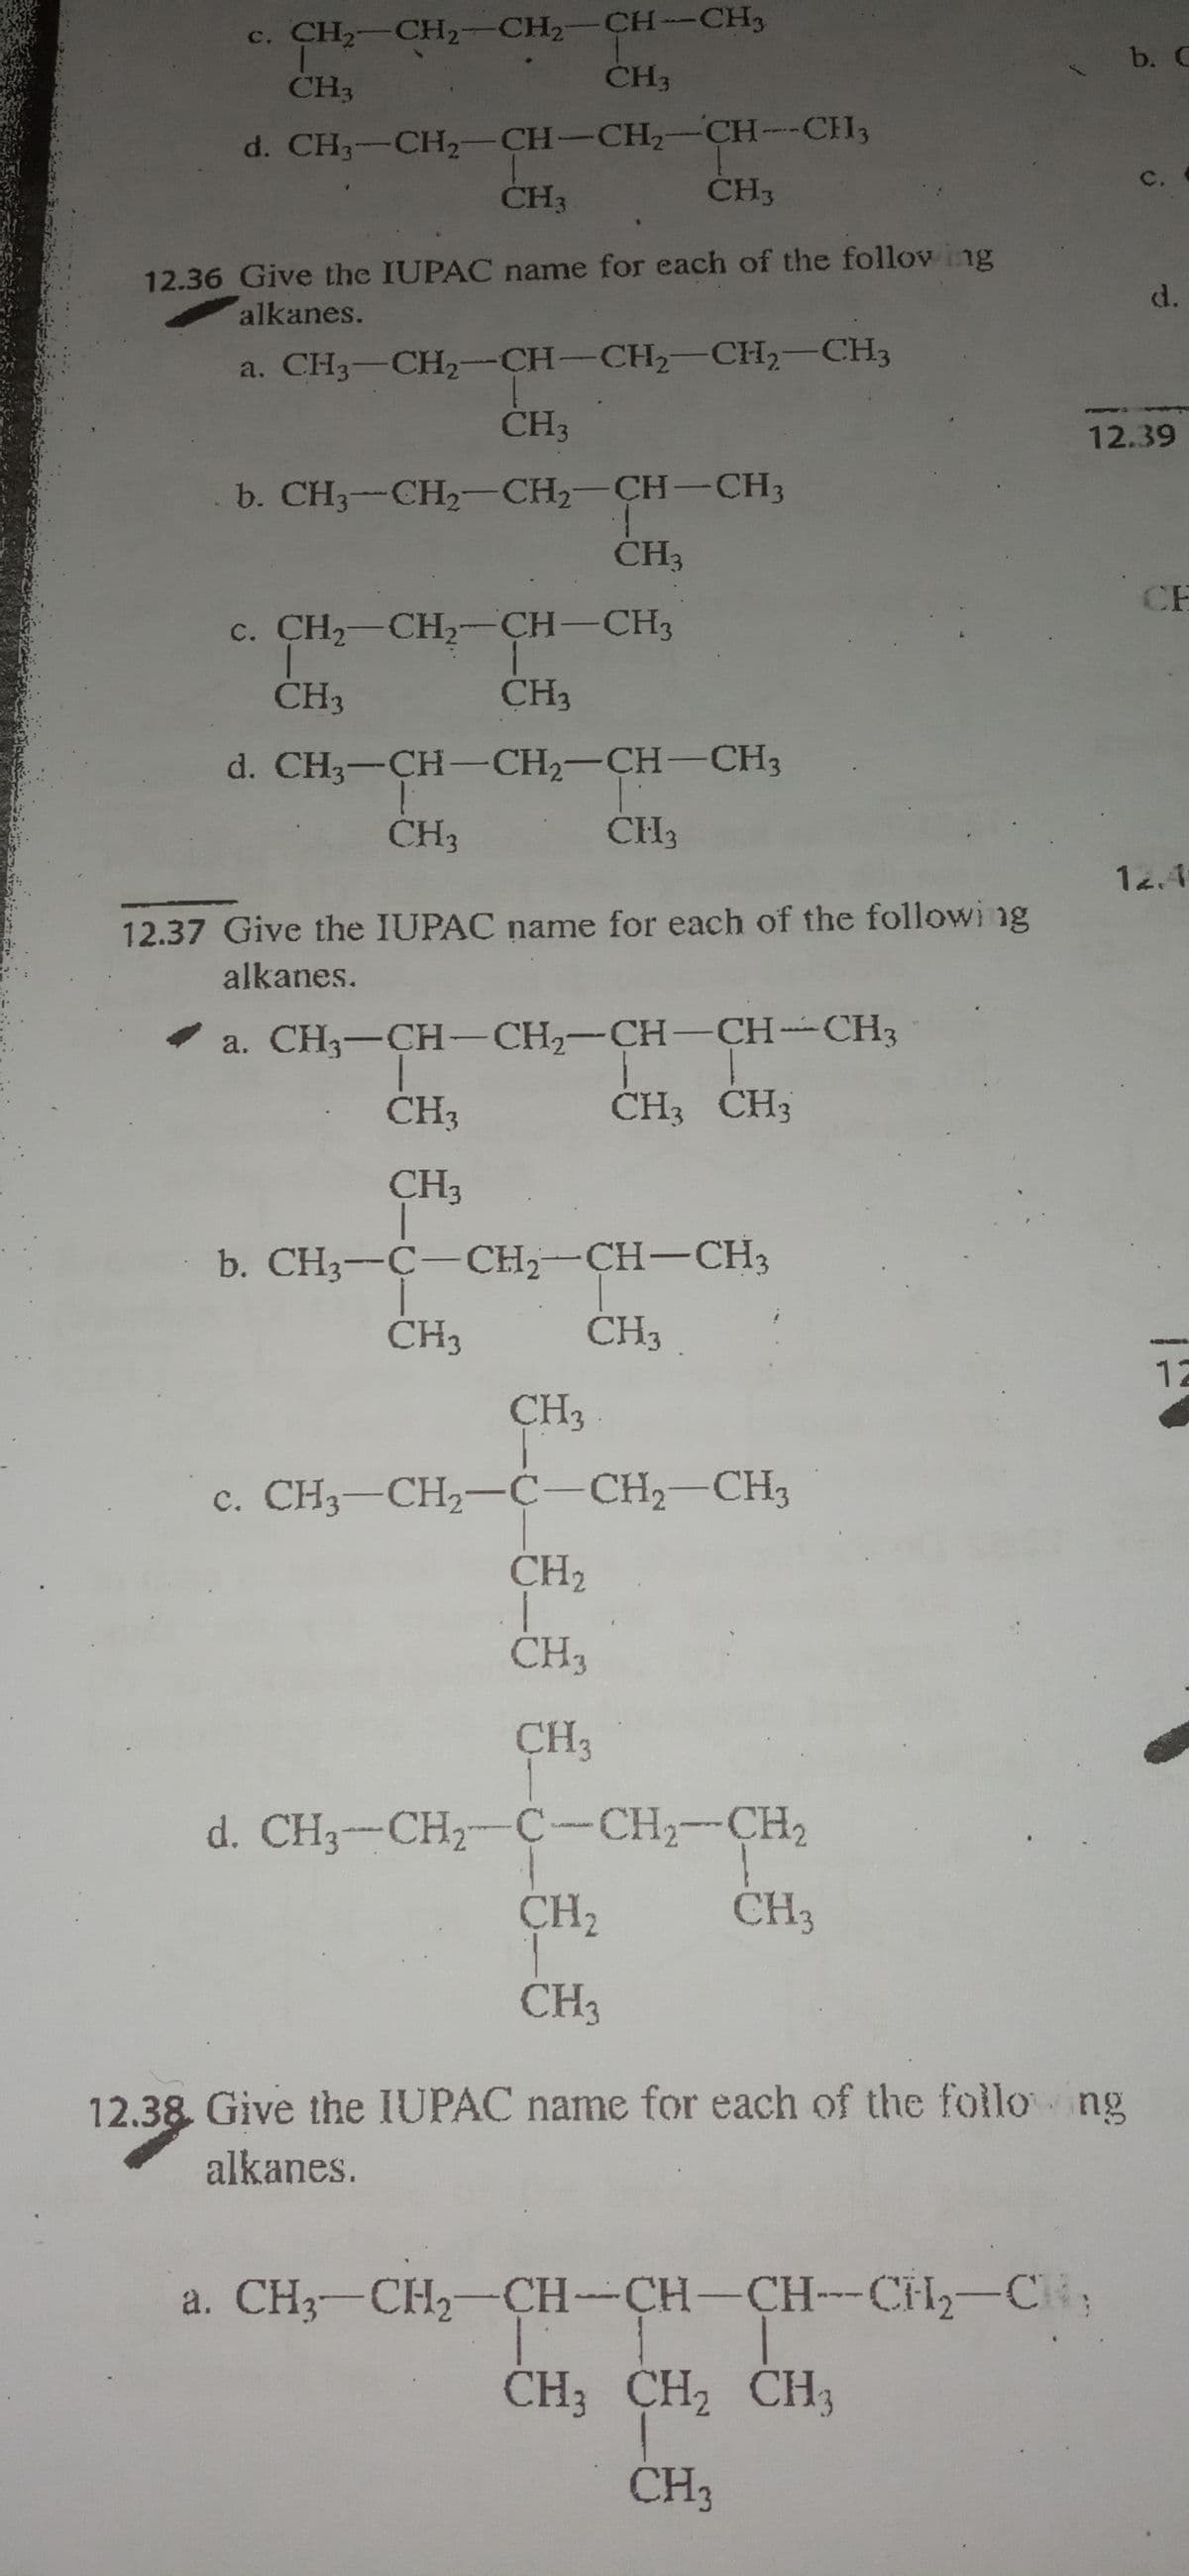 c. CH2-CH2-CH2-CH-CH3
b. C
CH3
CH3
d. CH3-CH2-CH-CH,-CH--CH3
CH3
111s
C.
CH3
12.36 Give the IUPAC name for each of the follov ing
d.
alkanes.
a. CH3-CH,--CH-CH2-CH,-CH3
ČH3
12.39
b. CH3--CH2-CH2-CH-CH3
ČH3
CH
c. CH-CH2-CH-CH3
ČH3
CH3
d. CH3-CH-CH2-CH-CH3
CH3
CH3
14.4
12.37 Give the IUPAC name for each of the followi ng
alkanes.
a. CH3-CH-CH2-CH-CH-CH3
CH3
CH3 CH3
CH3
b. CH3--C-CH,-CH-CH3
CH3
CH3
12
CH3
c. CH3-CH2-C-CH2-CH3
CH2
CH3
CH3
d. CH3-CH2-C-CH2-CH2
CH3
CH2
1.
CH3
12.38 Give the IUPAC name for each of the follo ng
alkanes.
a. CH3-CH2-CH-CH-CH-CH-C
CH3 CH2 CH3
CH3
